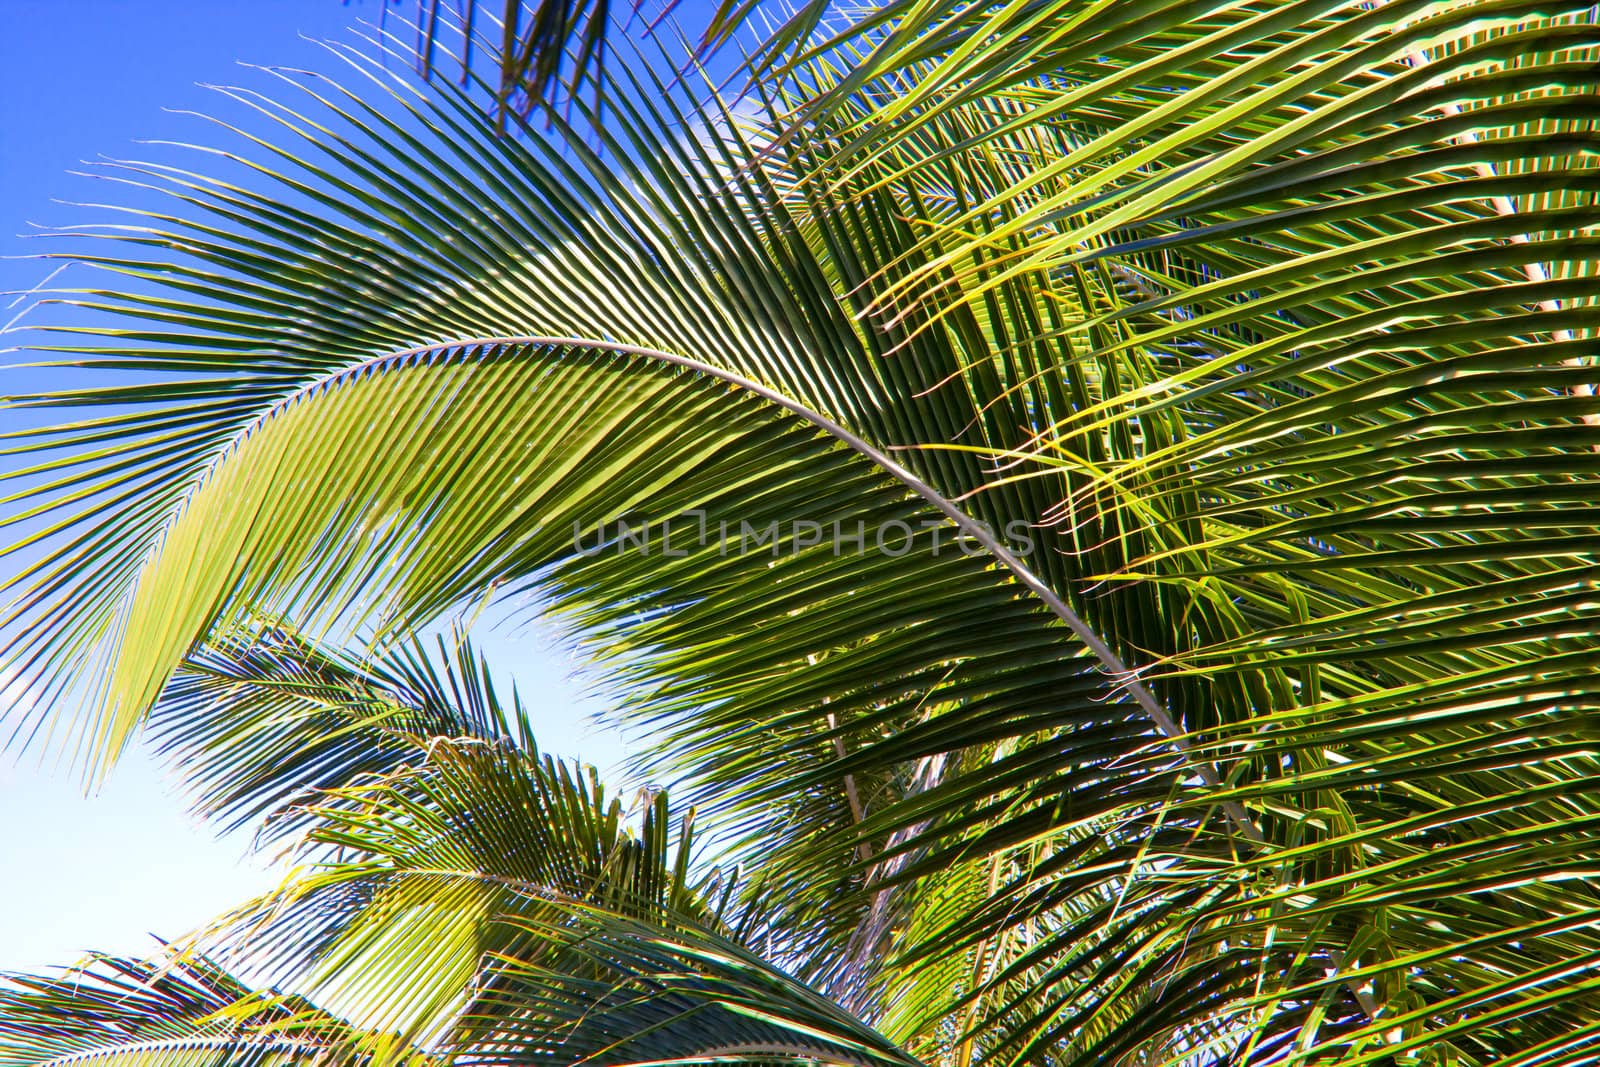 An abstract color image of green palm branches during the daytime in Hawaii.